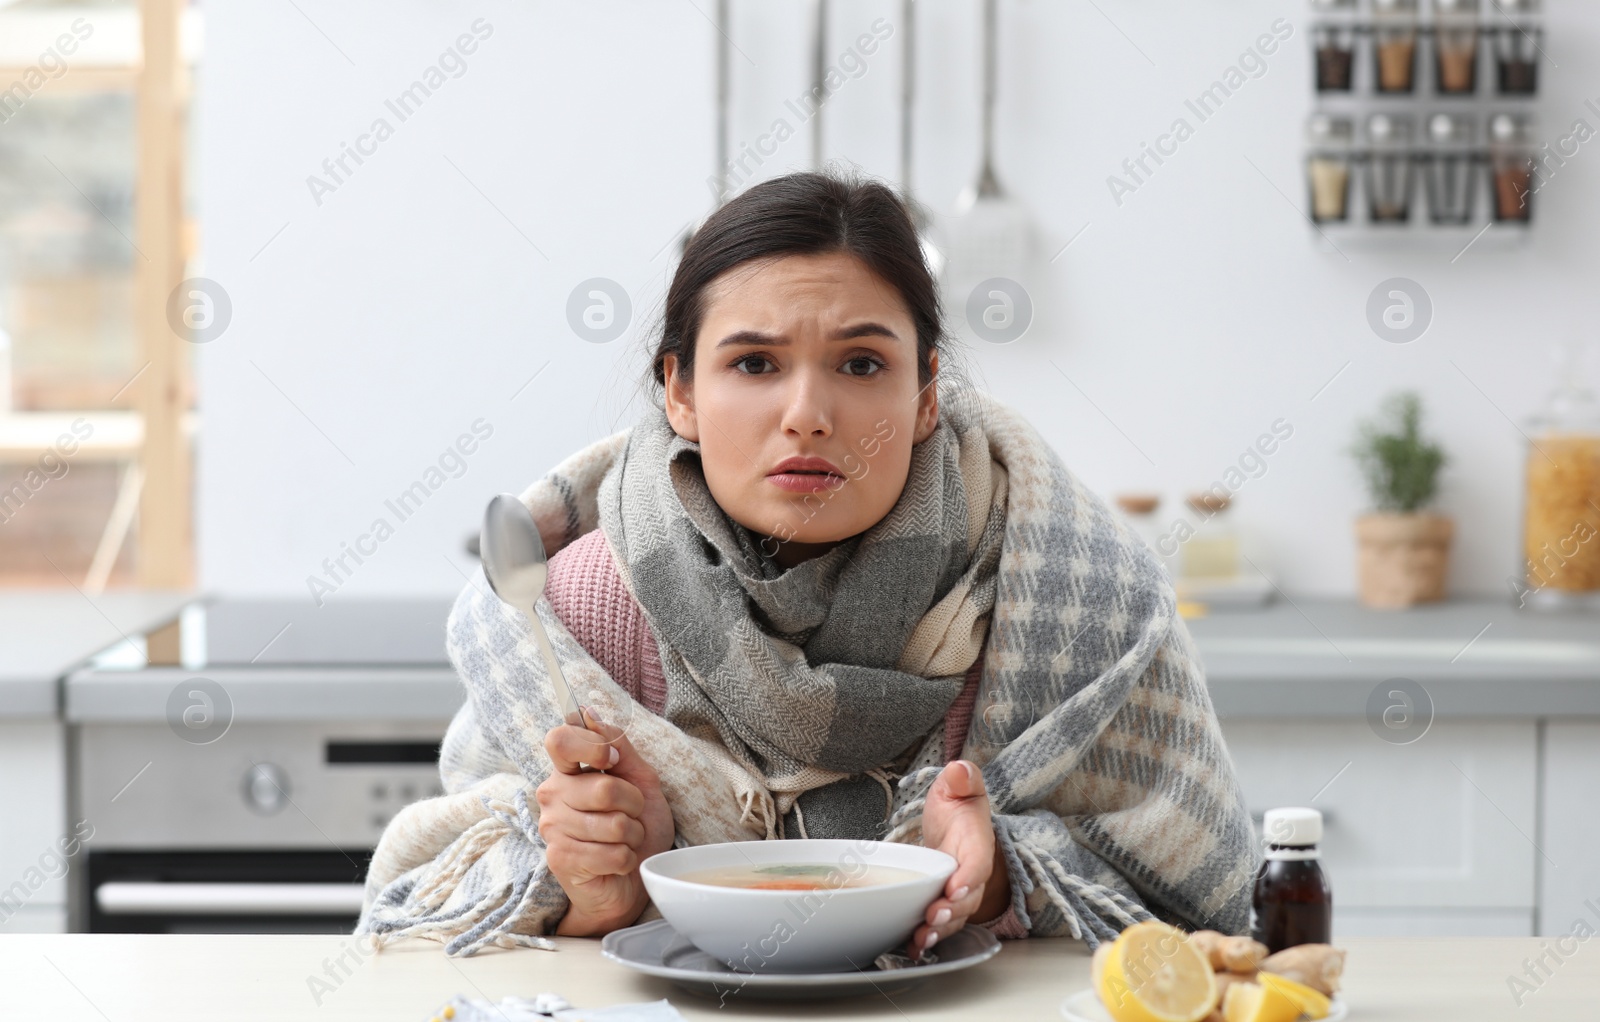 Photo of Sick young woman eating soup to cure flu at table in kitchen